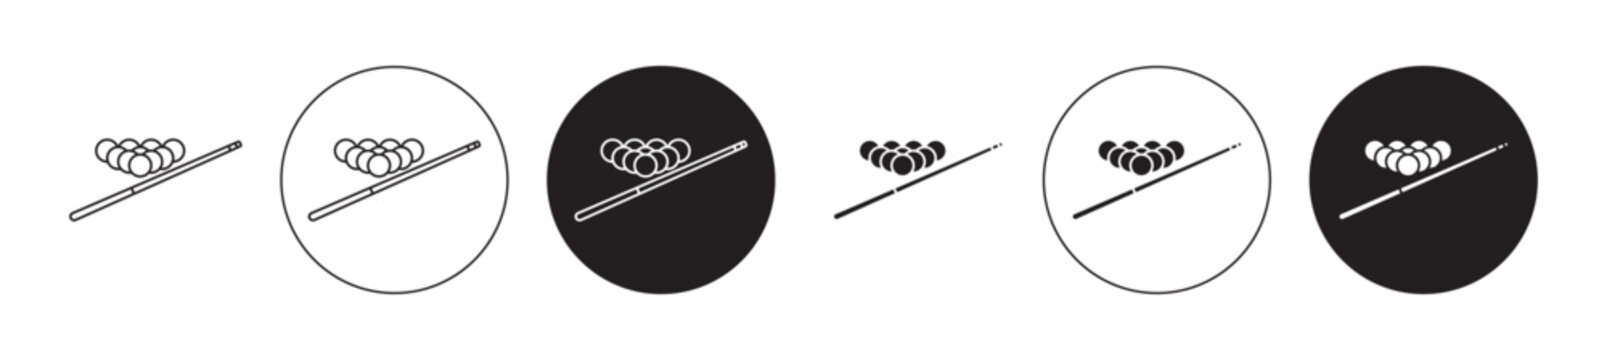 billiards icon set. play table pool game vector symbol. snooker ball game sign in black filled and outlined style.